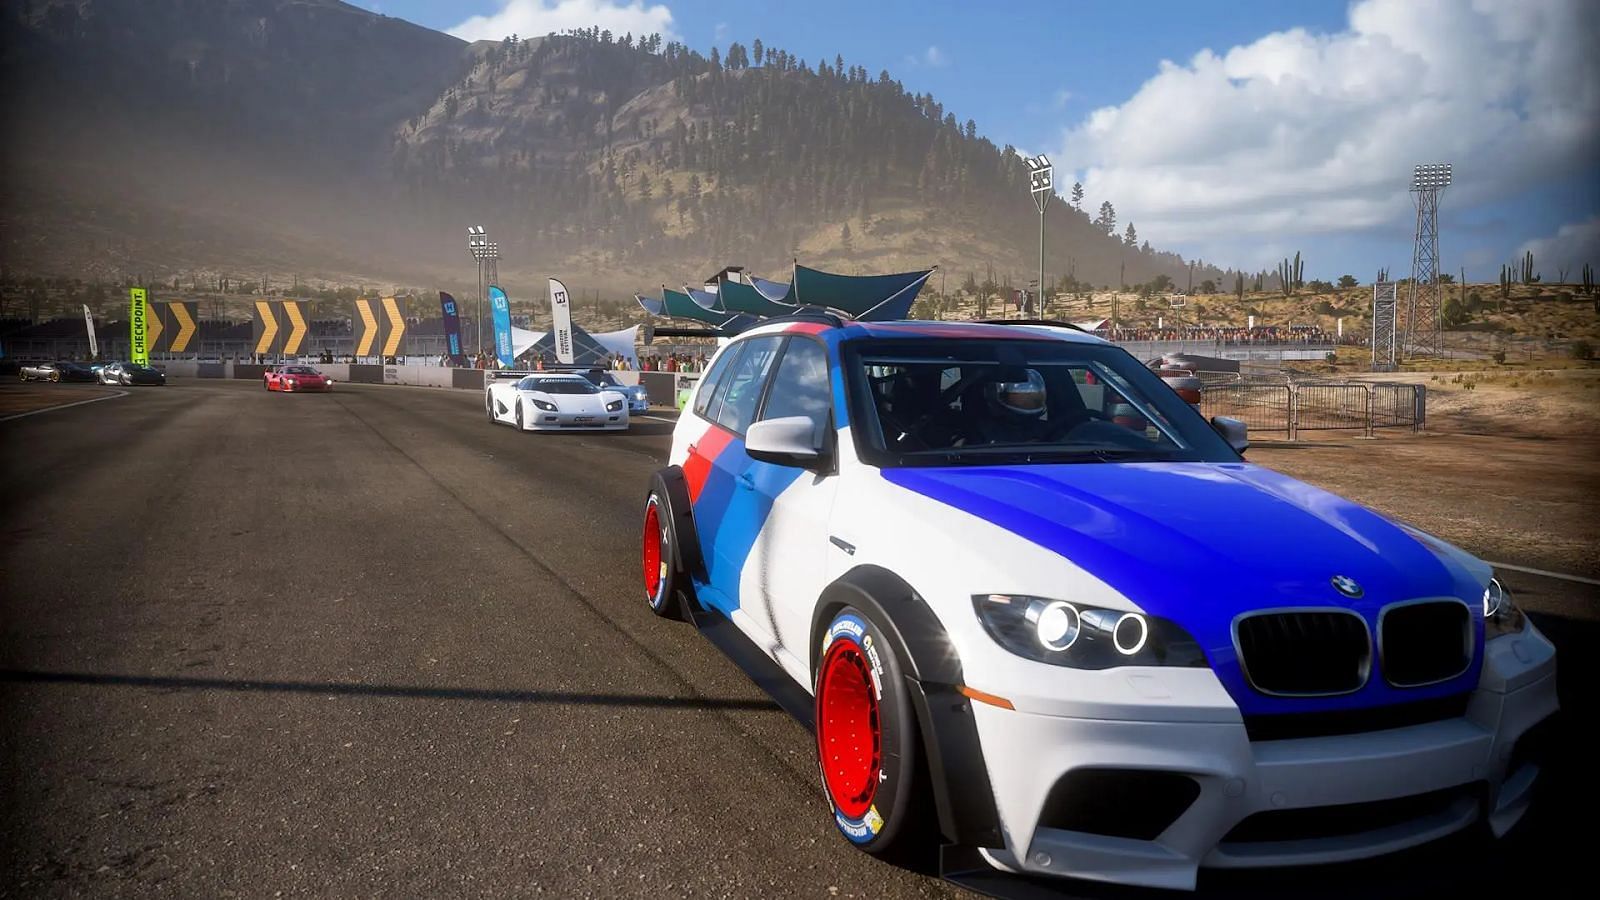 The handling of the BMW X5 M is amazing (Screengrab from Forza Horizon 5)